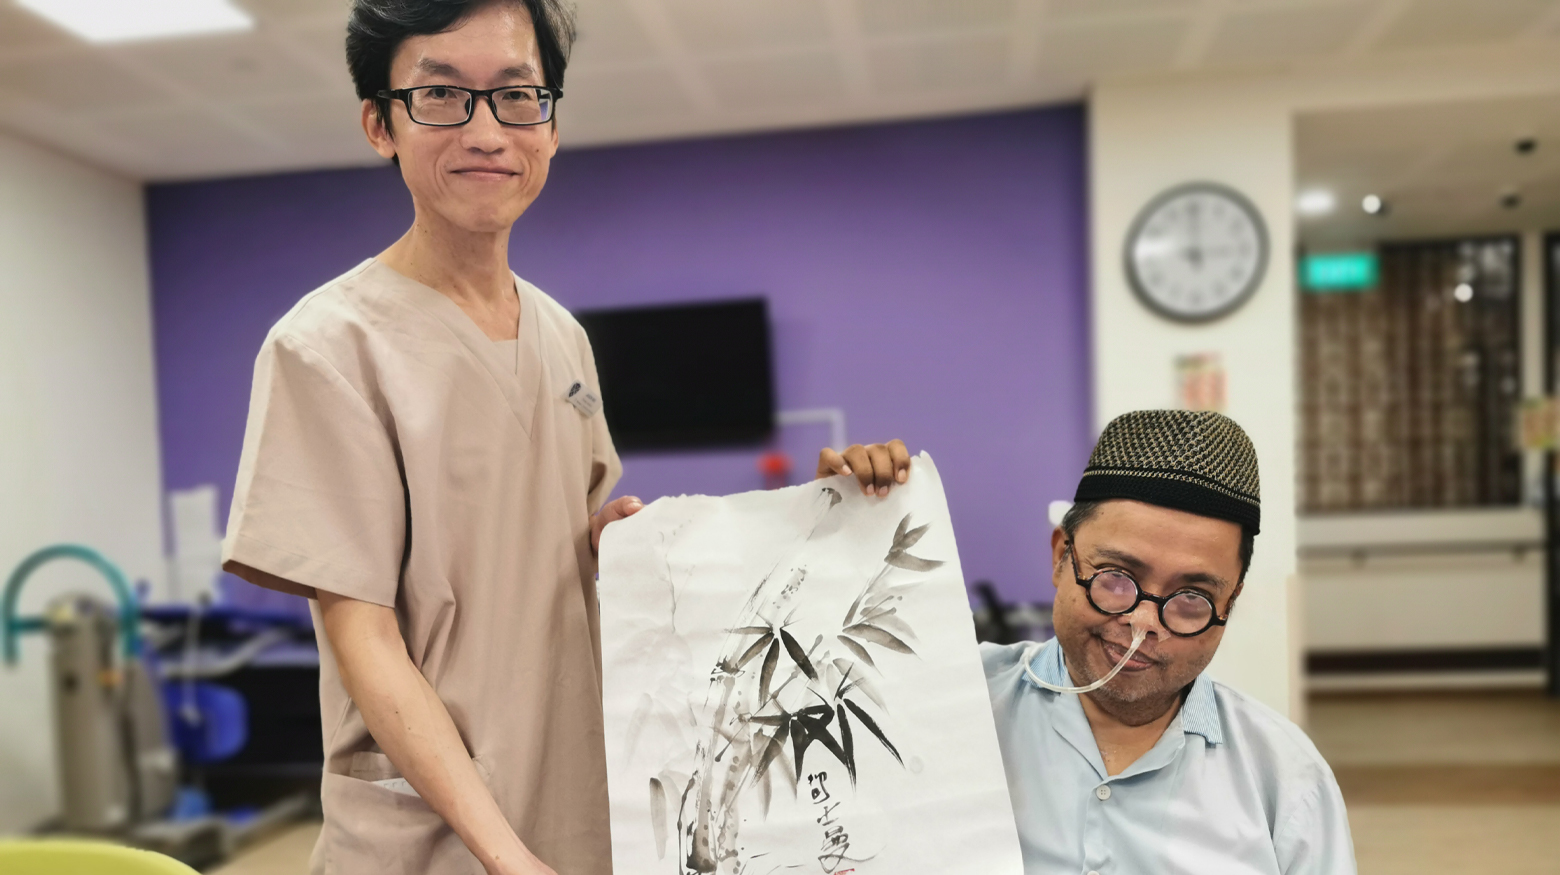 Mr Azman shows off his finished work, along with Jason, who often stands by him and helps out when necessary.